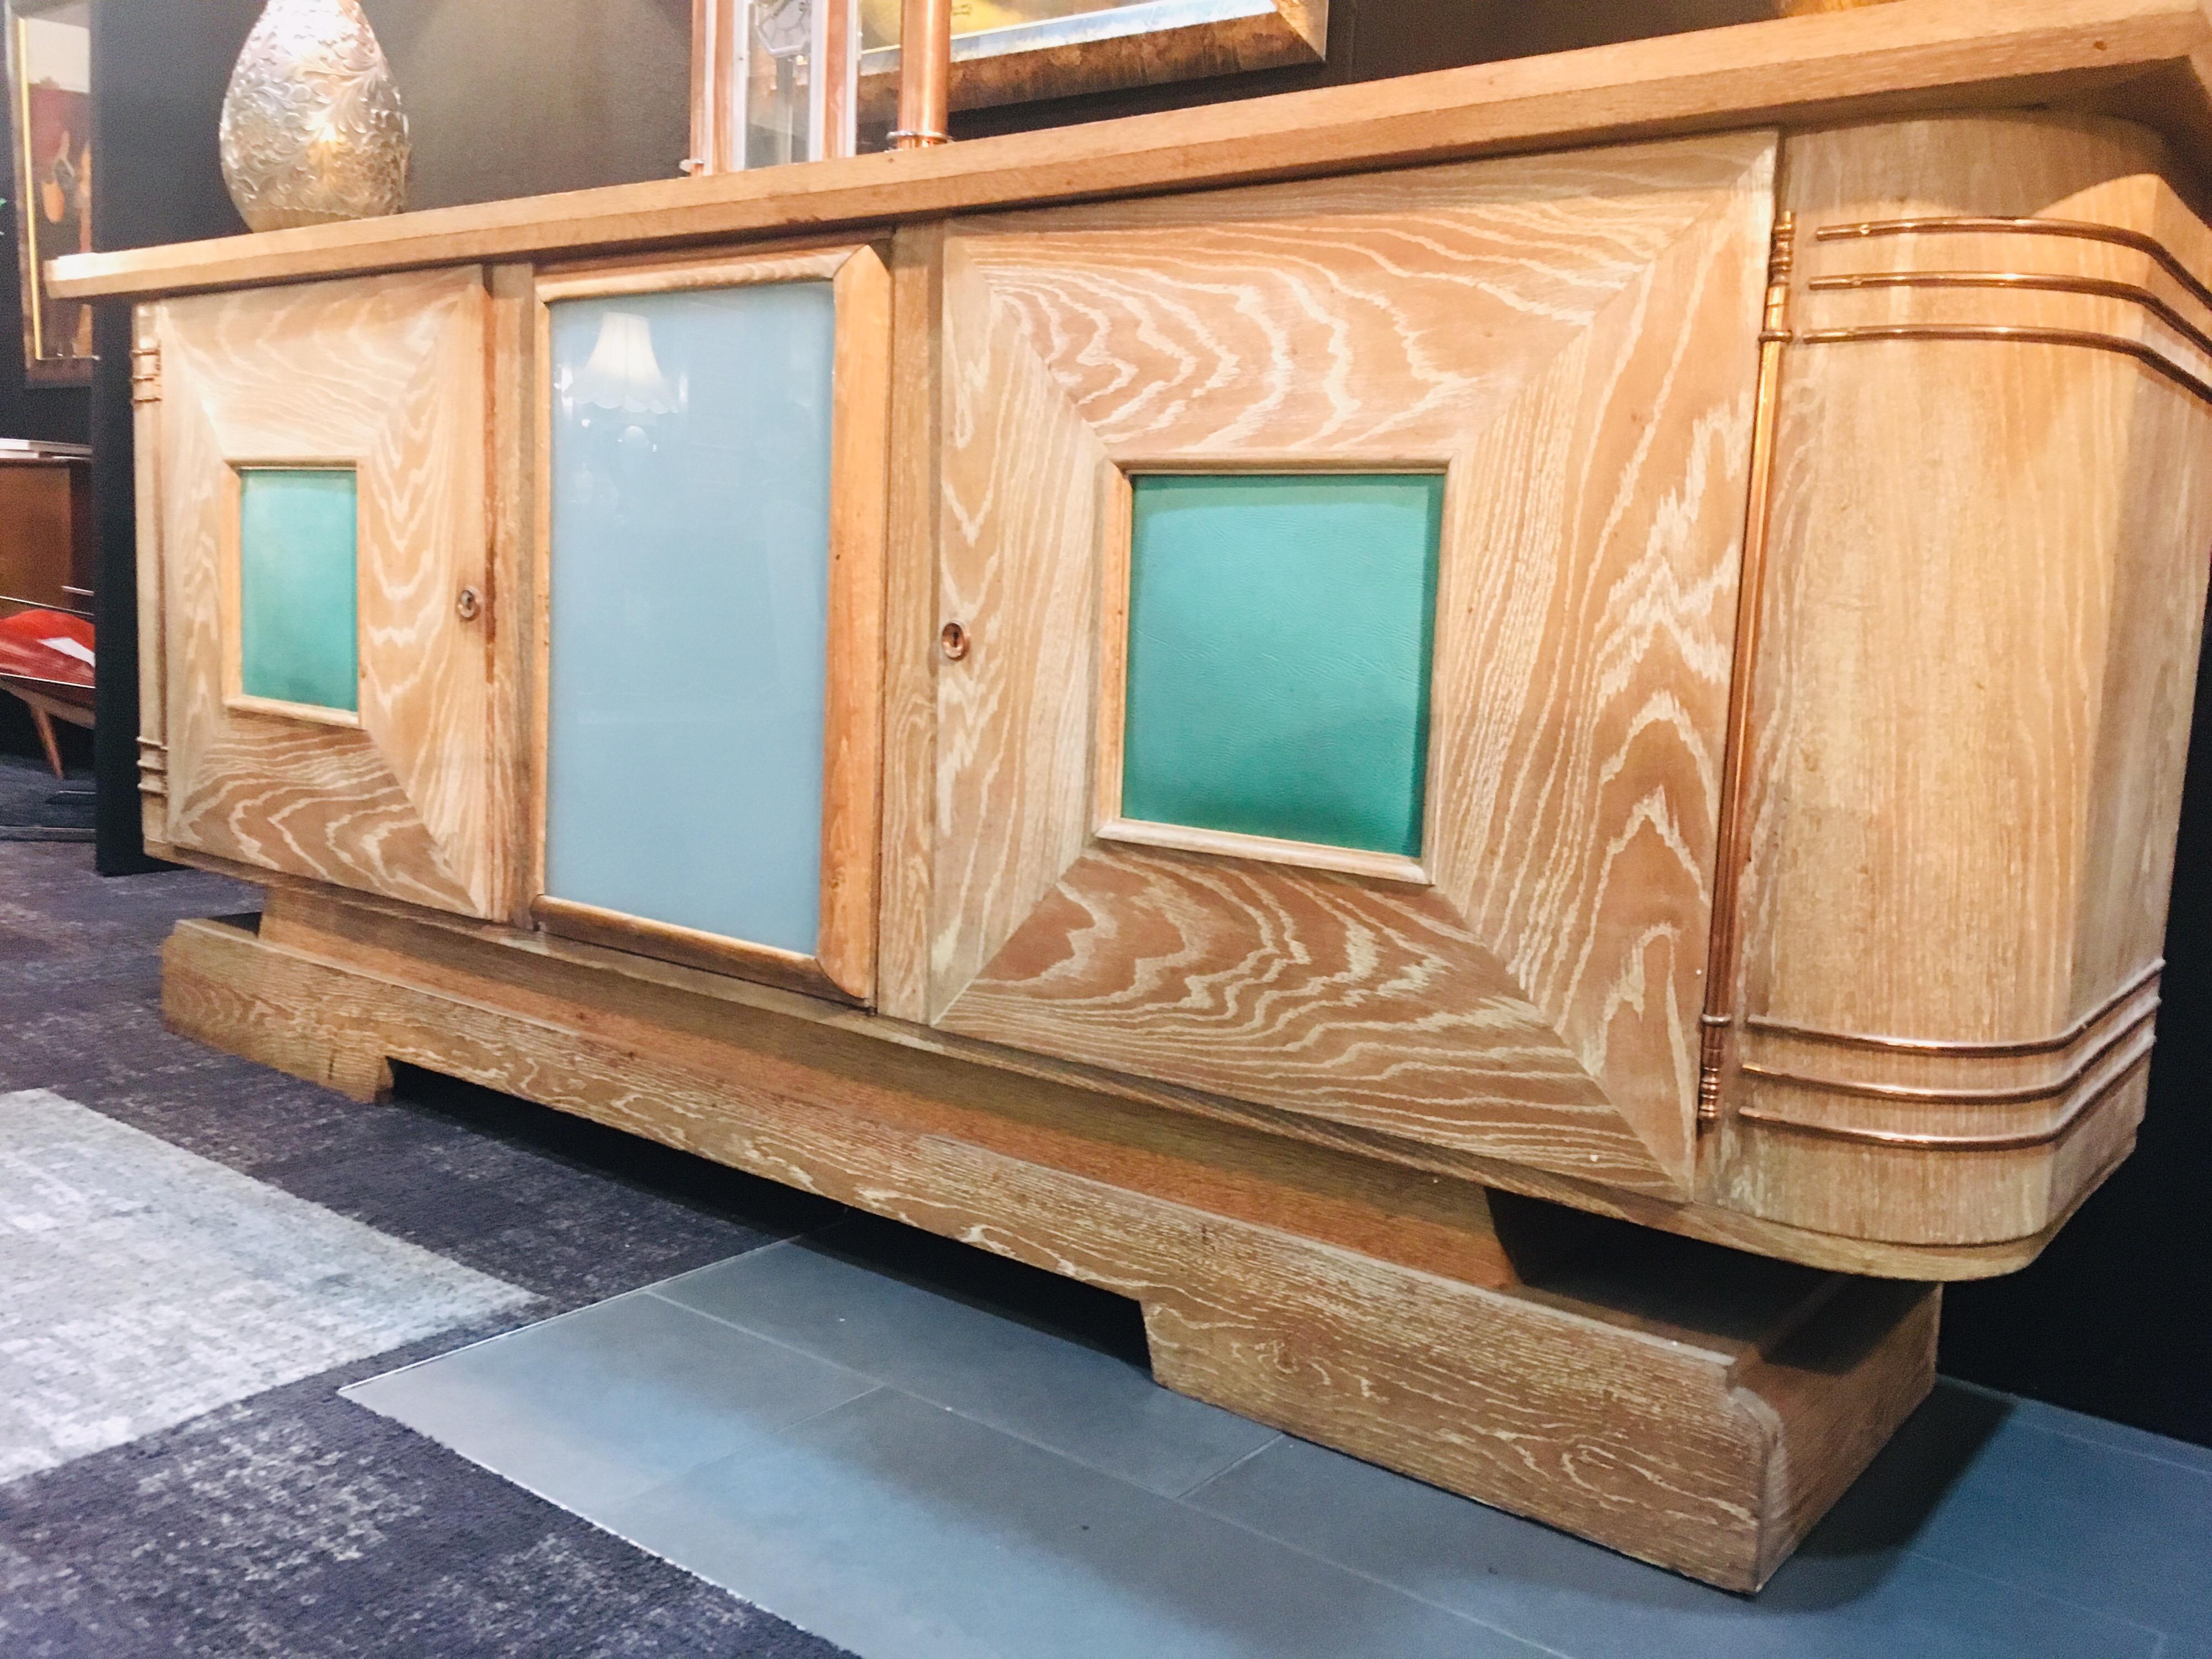 Art Deco Jean-Charles Moreux Cerused oak sideboard, France, circa 1940s.

Presents in good original order, wear commensurate with age. Oak featuring a cerused finish with impressive copper detailing. A stunning example of French craftsmanship from